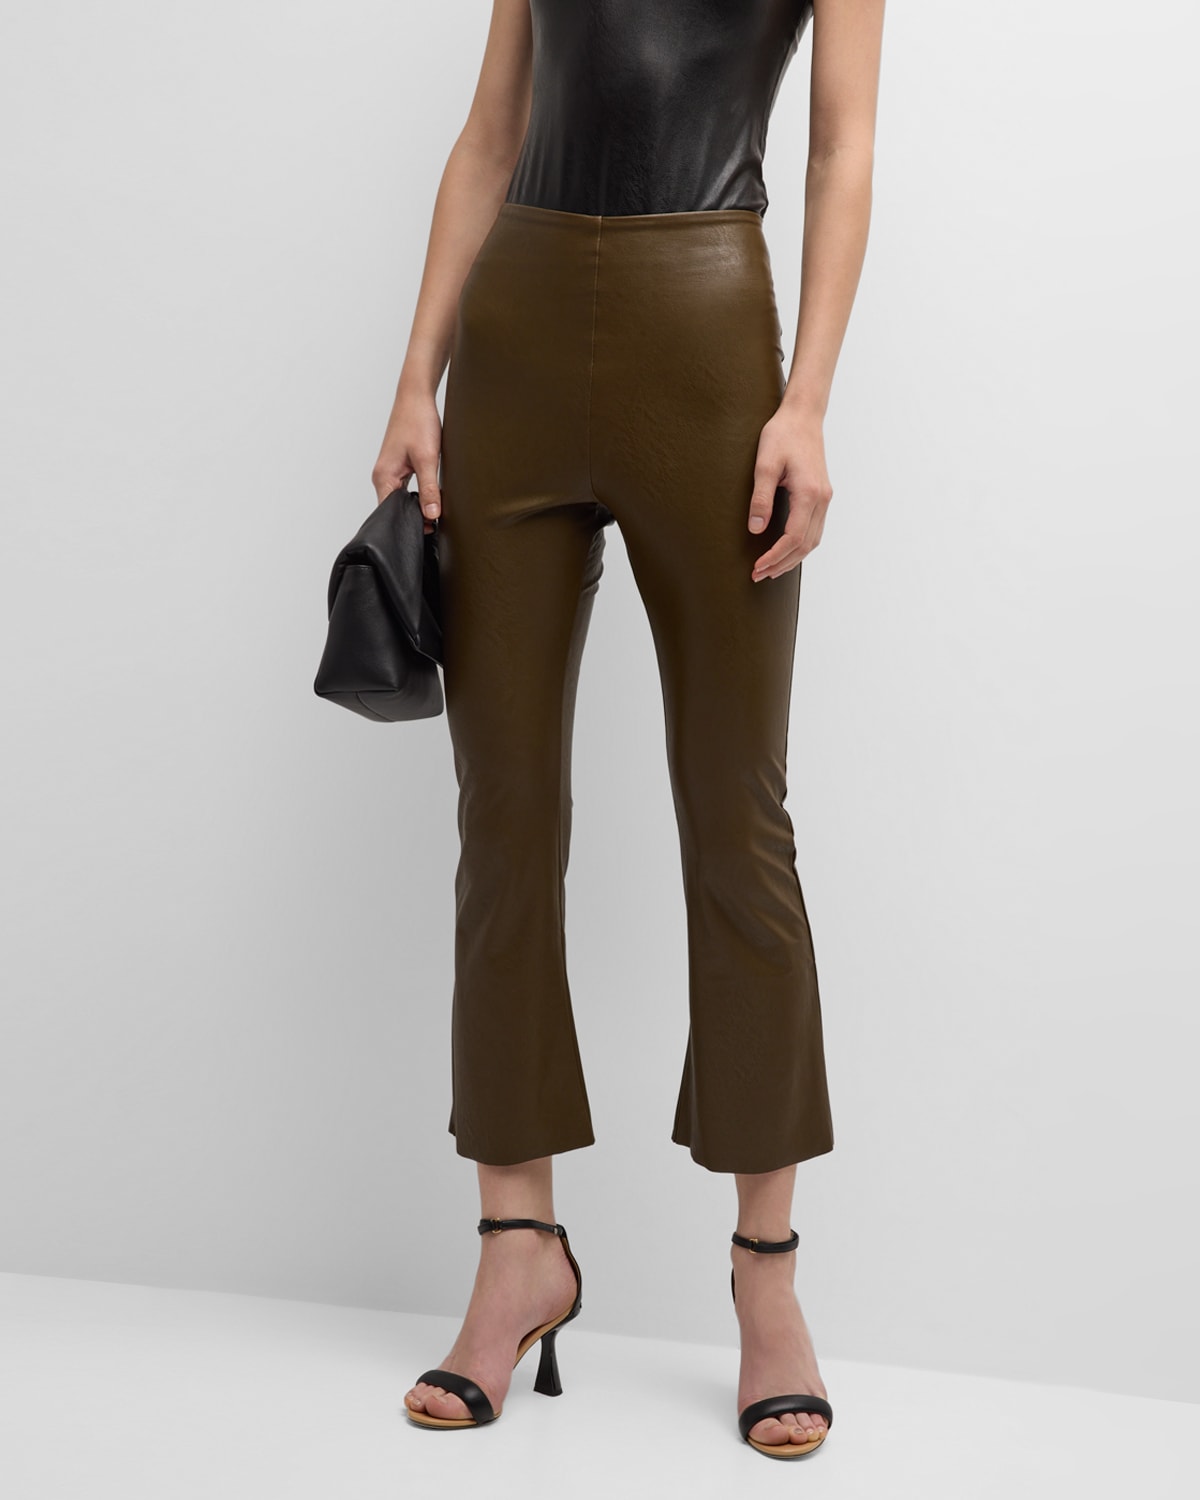 Commando Faux Leather Cropped Flare Pants In Cadet